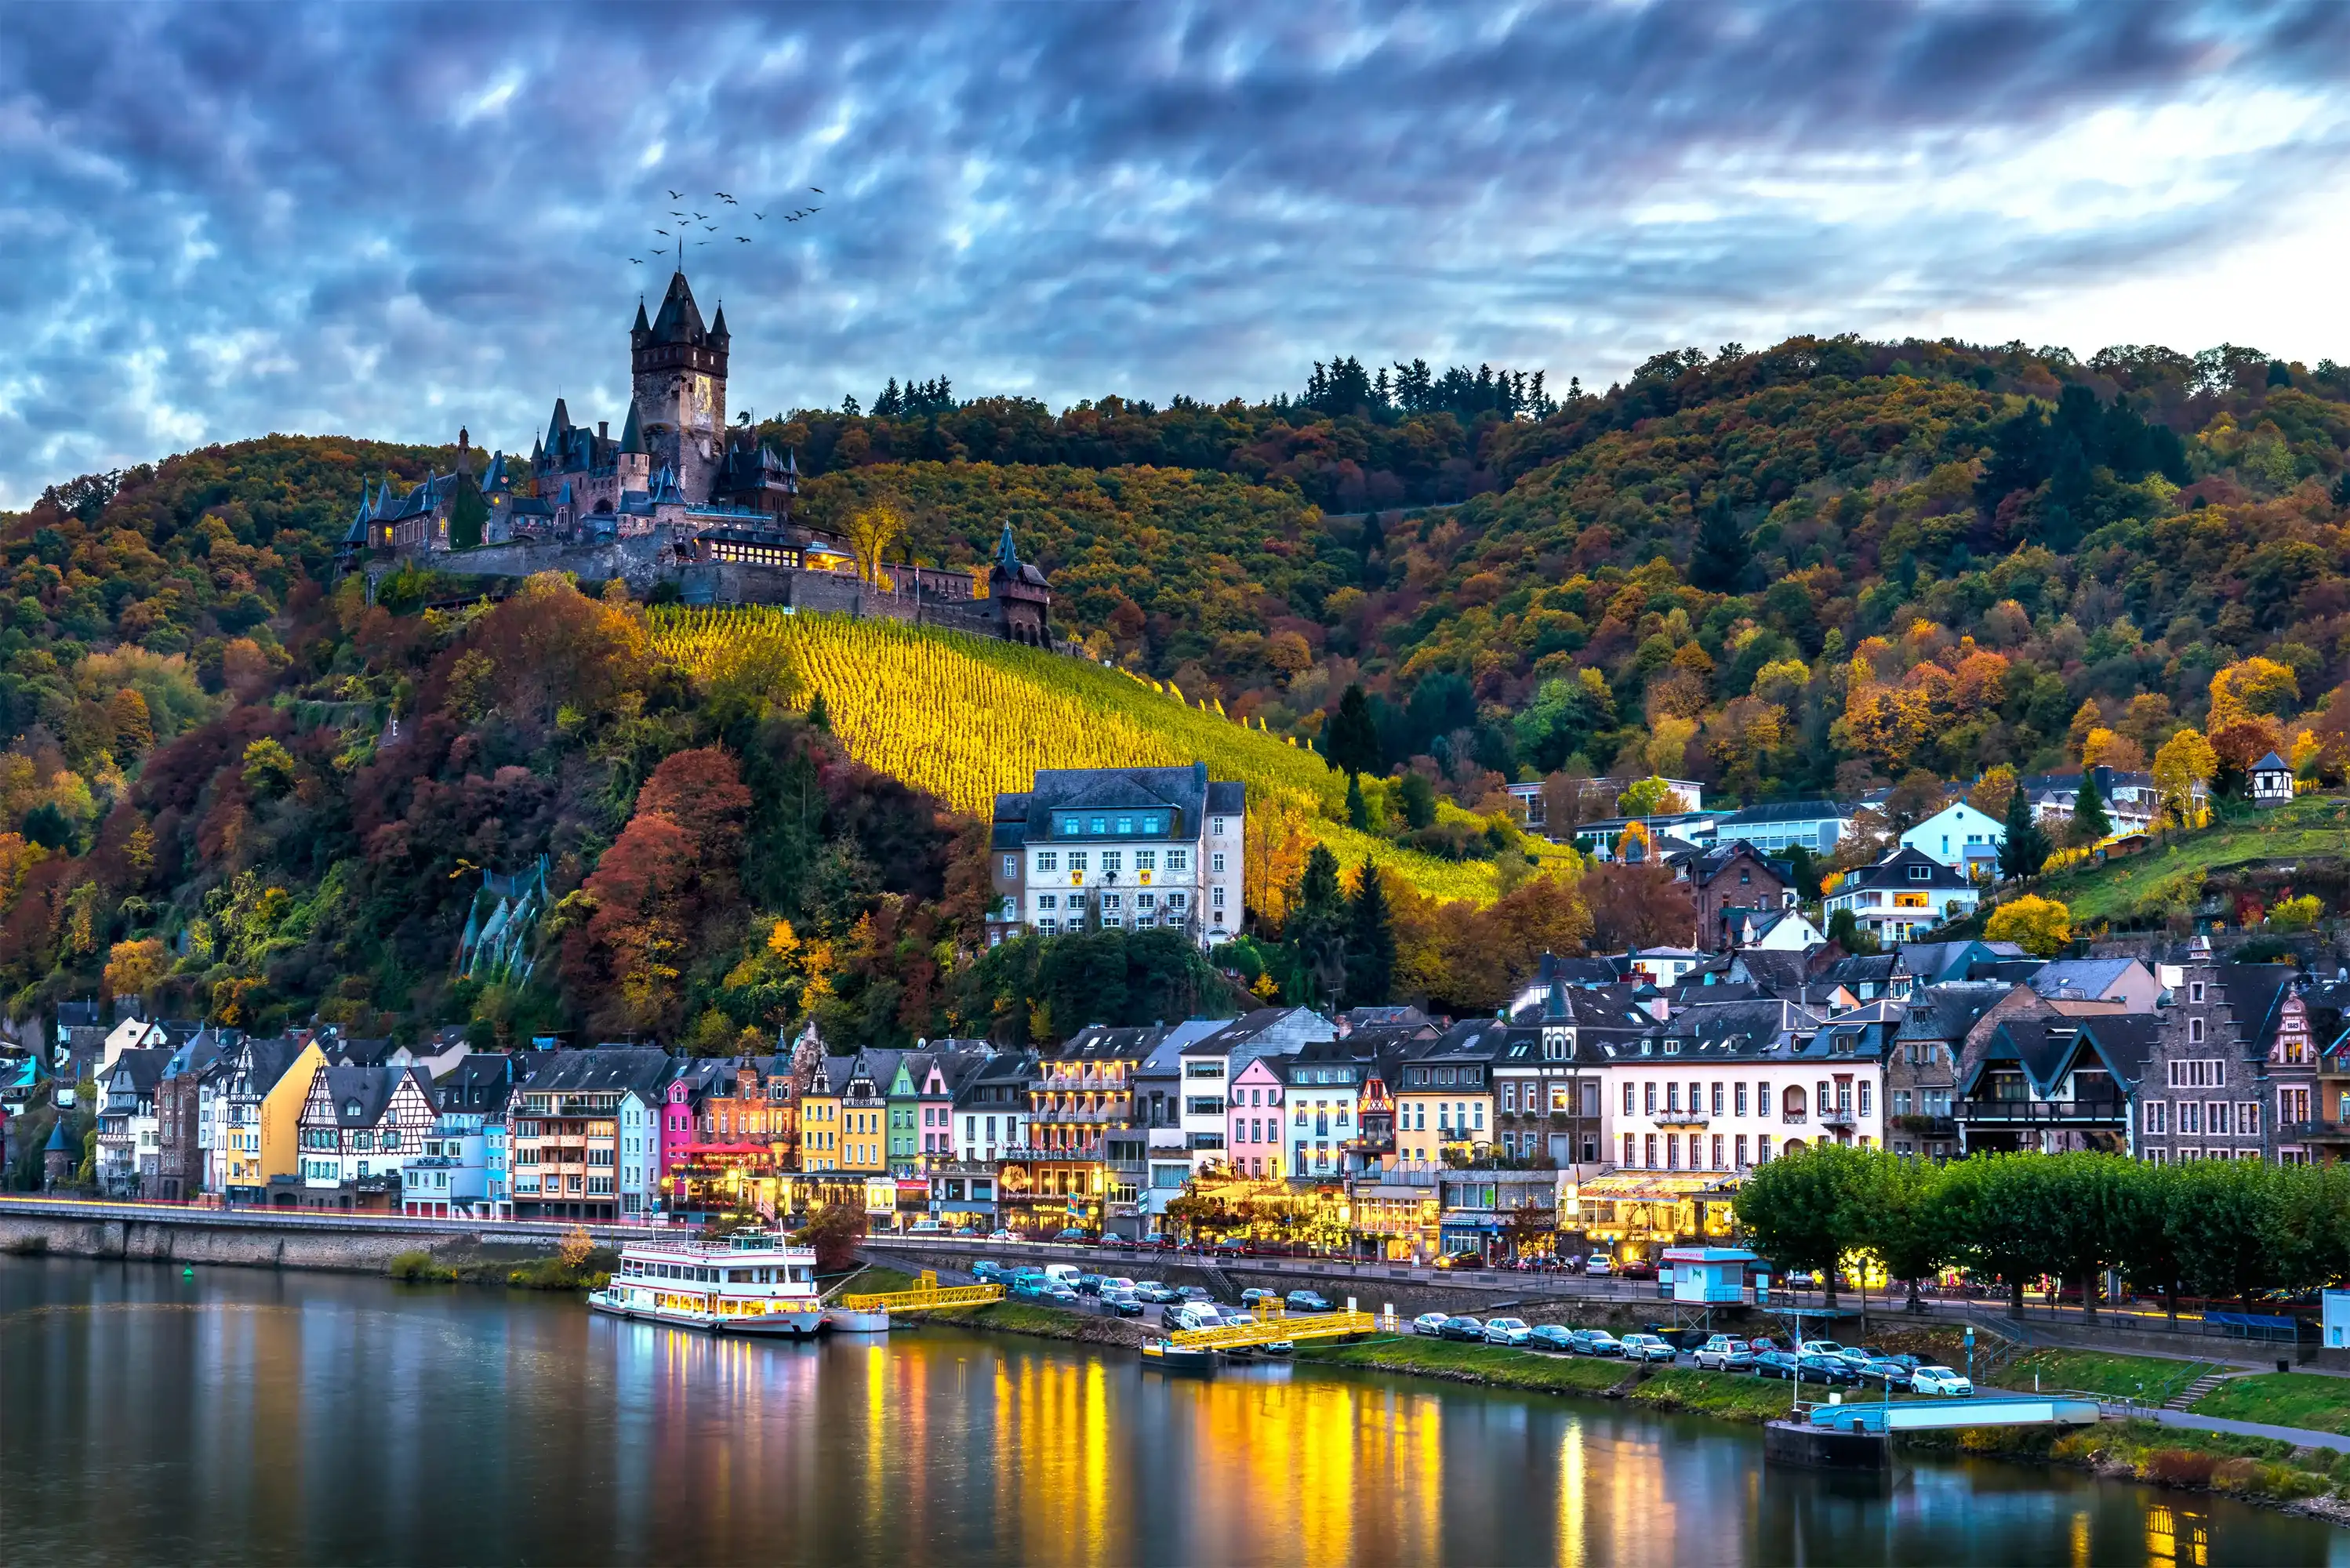 Best Cochem hotels. Cheap hotels in Cochem, Germany